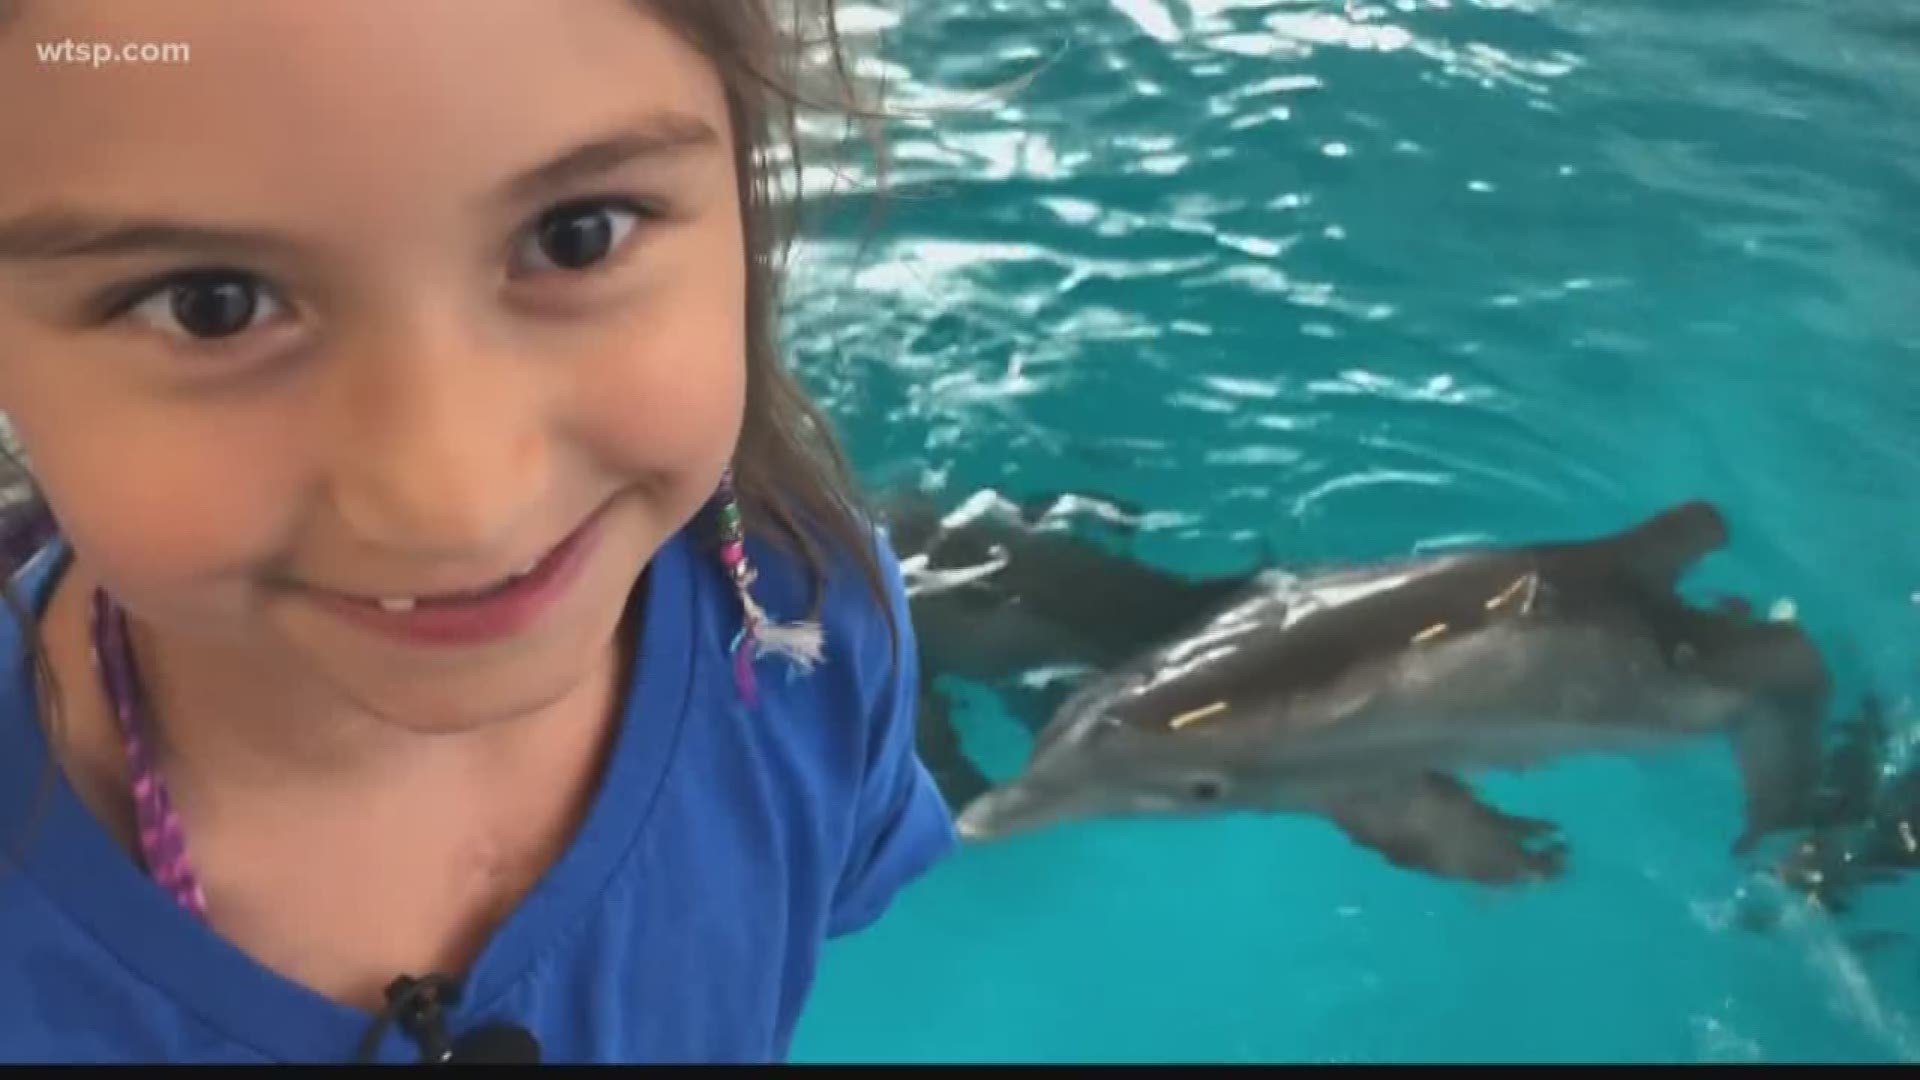 Avery Worthington has been through a lot in her five short years of life after being diagnosed with congenital heart disease. 
While going through numerous surgeries, treatment and procedures, she found comfort and became obsessed with dolphins. 
Avery's mom, Sarah, thinks Avery finds comfort with dolphins like Winter and Hope because the local stars also needed medical treatment to overcome their own disabilities.